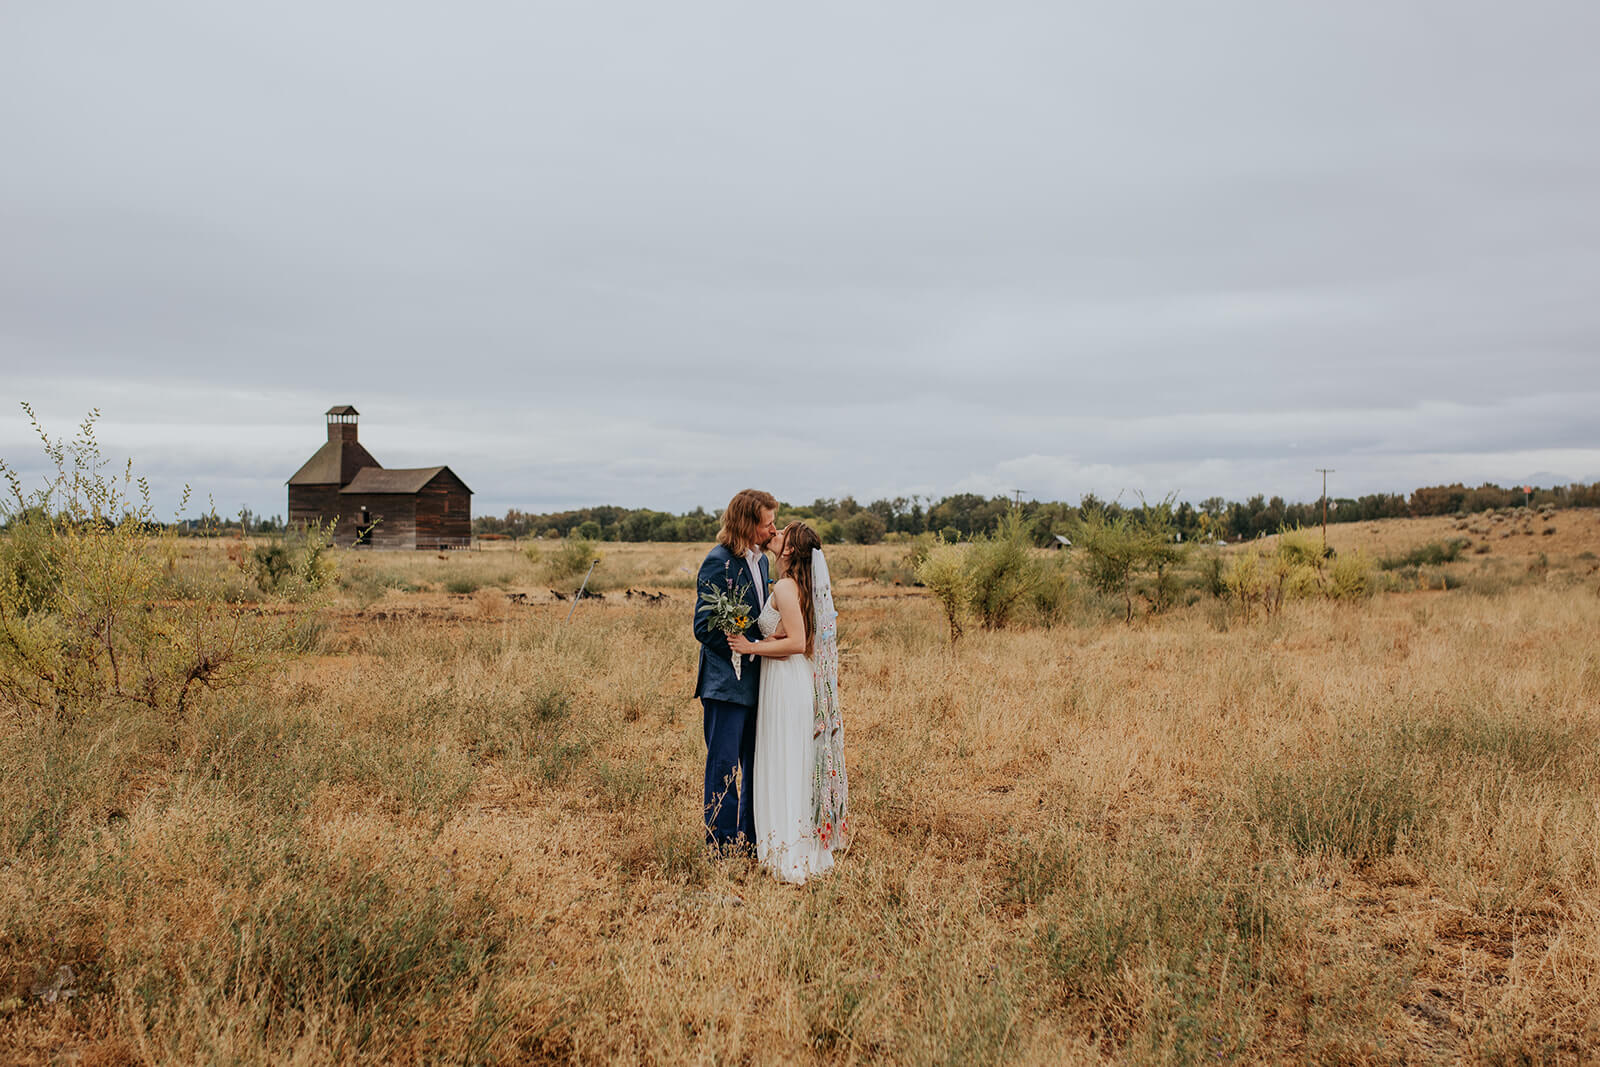 Wedding portraits after casual wedding in Wapato